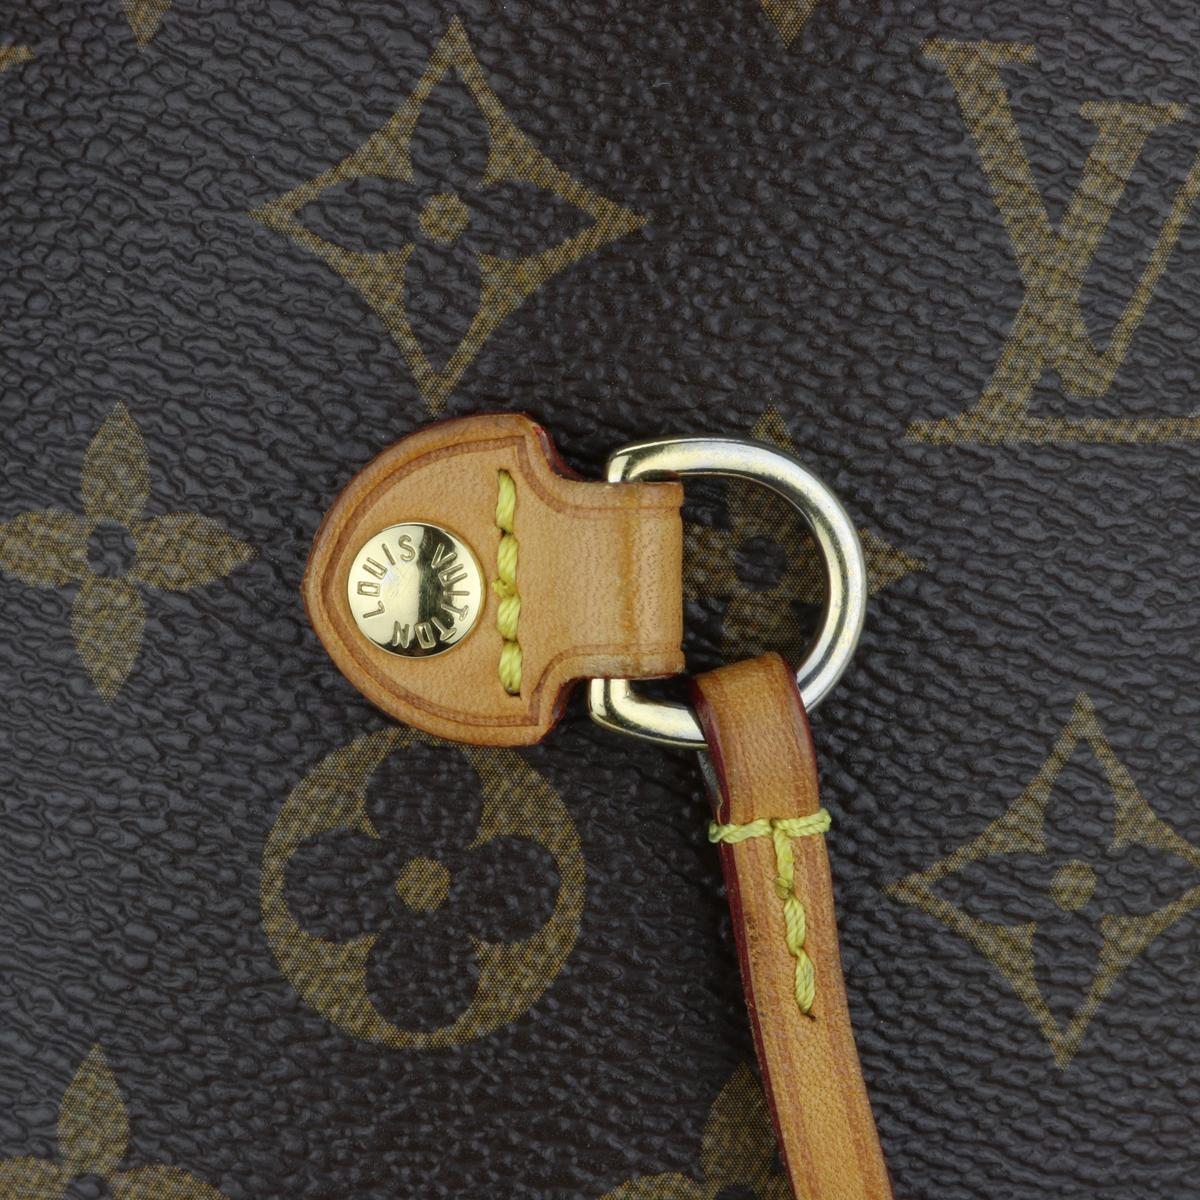 Louis Vuitton Neverfull MM Bag in Monogram with Beige Interior 2017 In Good Condition For Sale In Huddersfield, GB